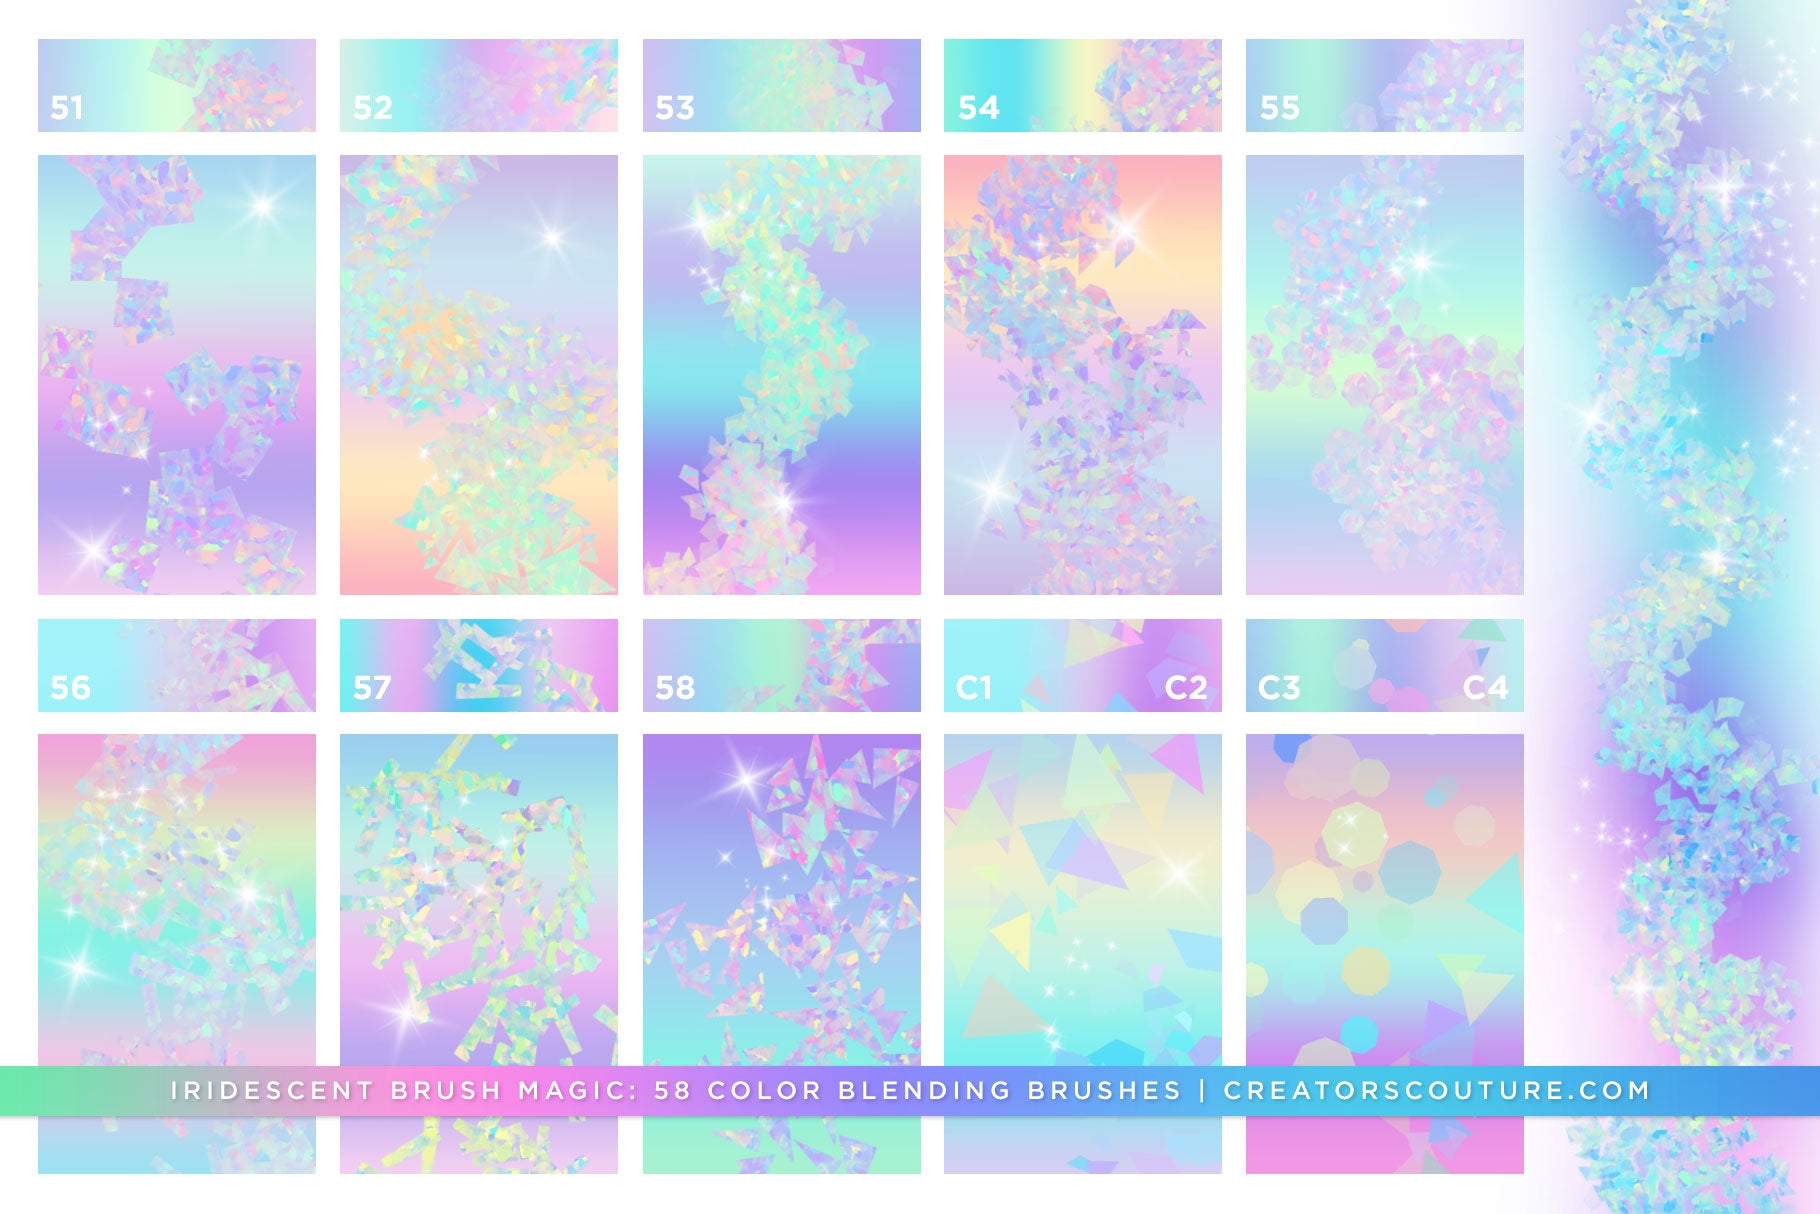 photoshop brushes for instant iridescent and holographic effects and brush strokes, brush preview chart 6